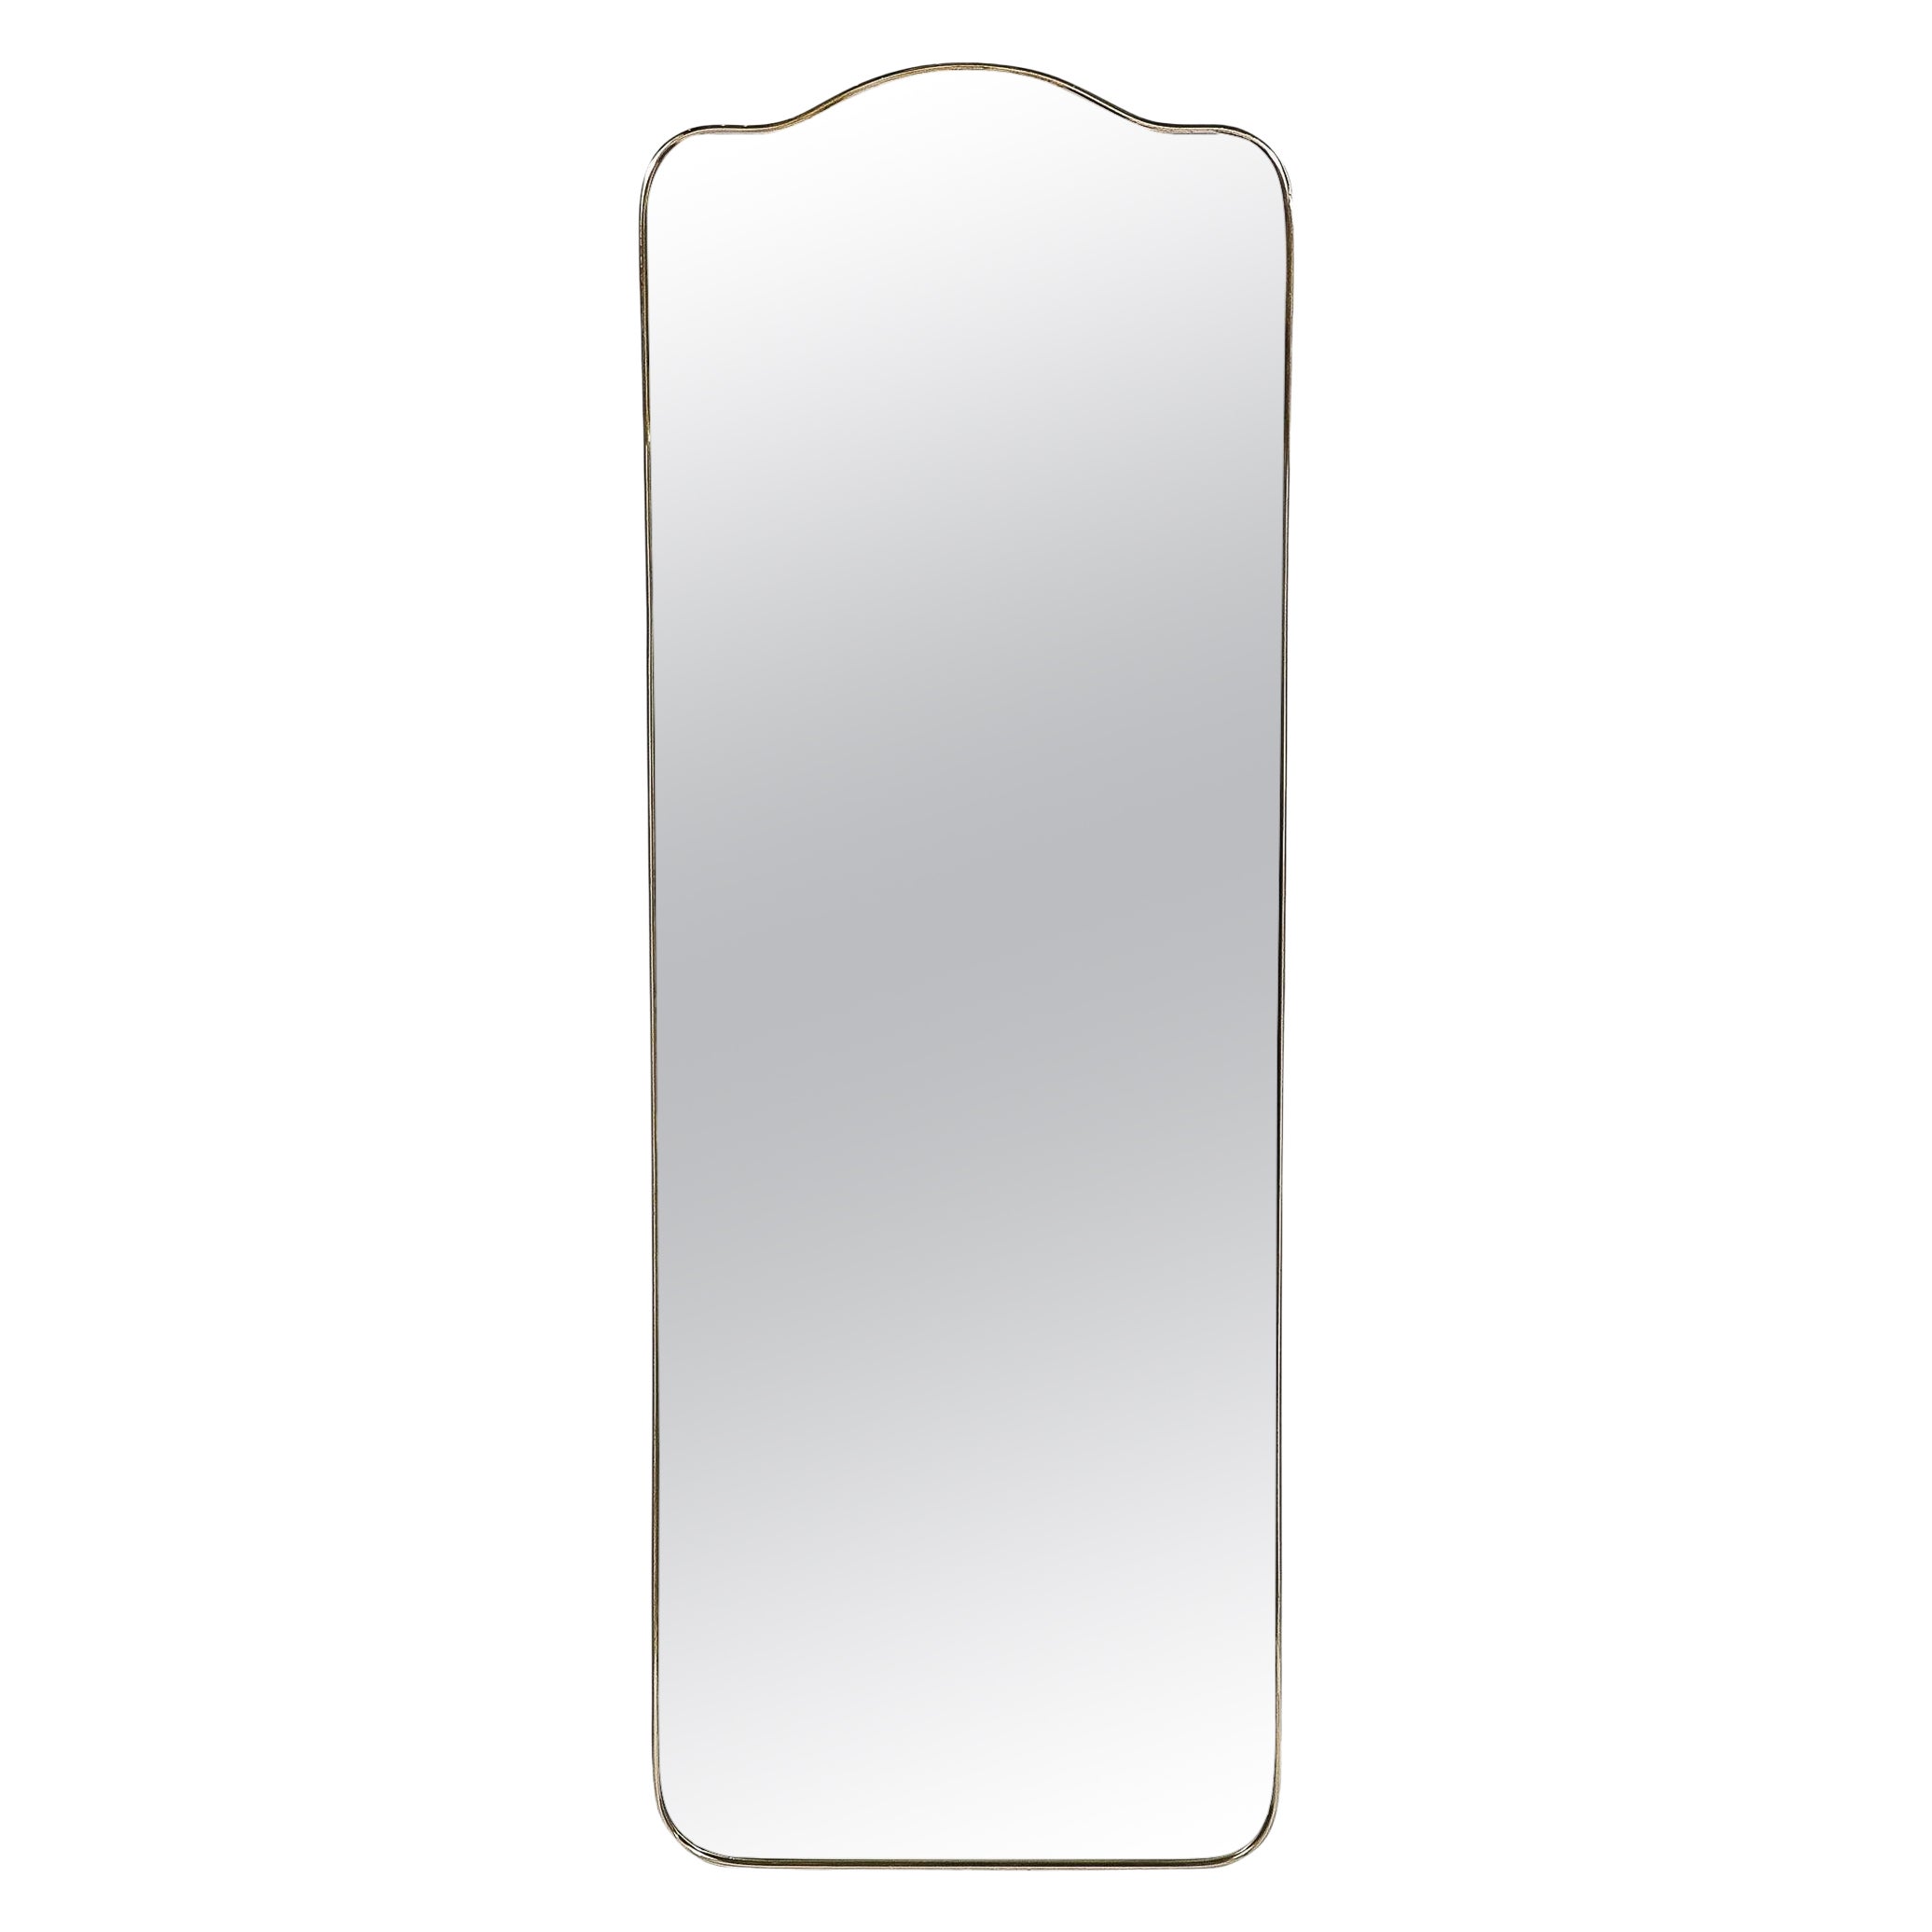 Mid-Century Modernist Vertical Brass Wrapped Mirror With Rounded Arch Detailing For Sale